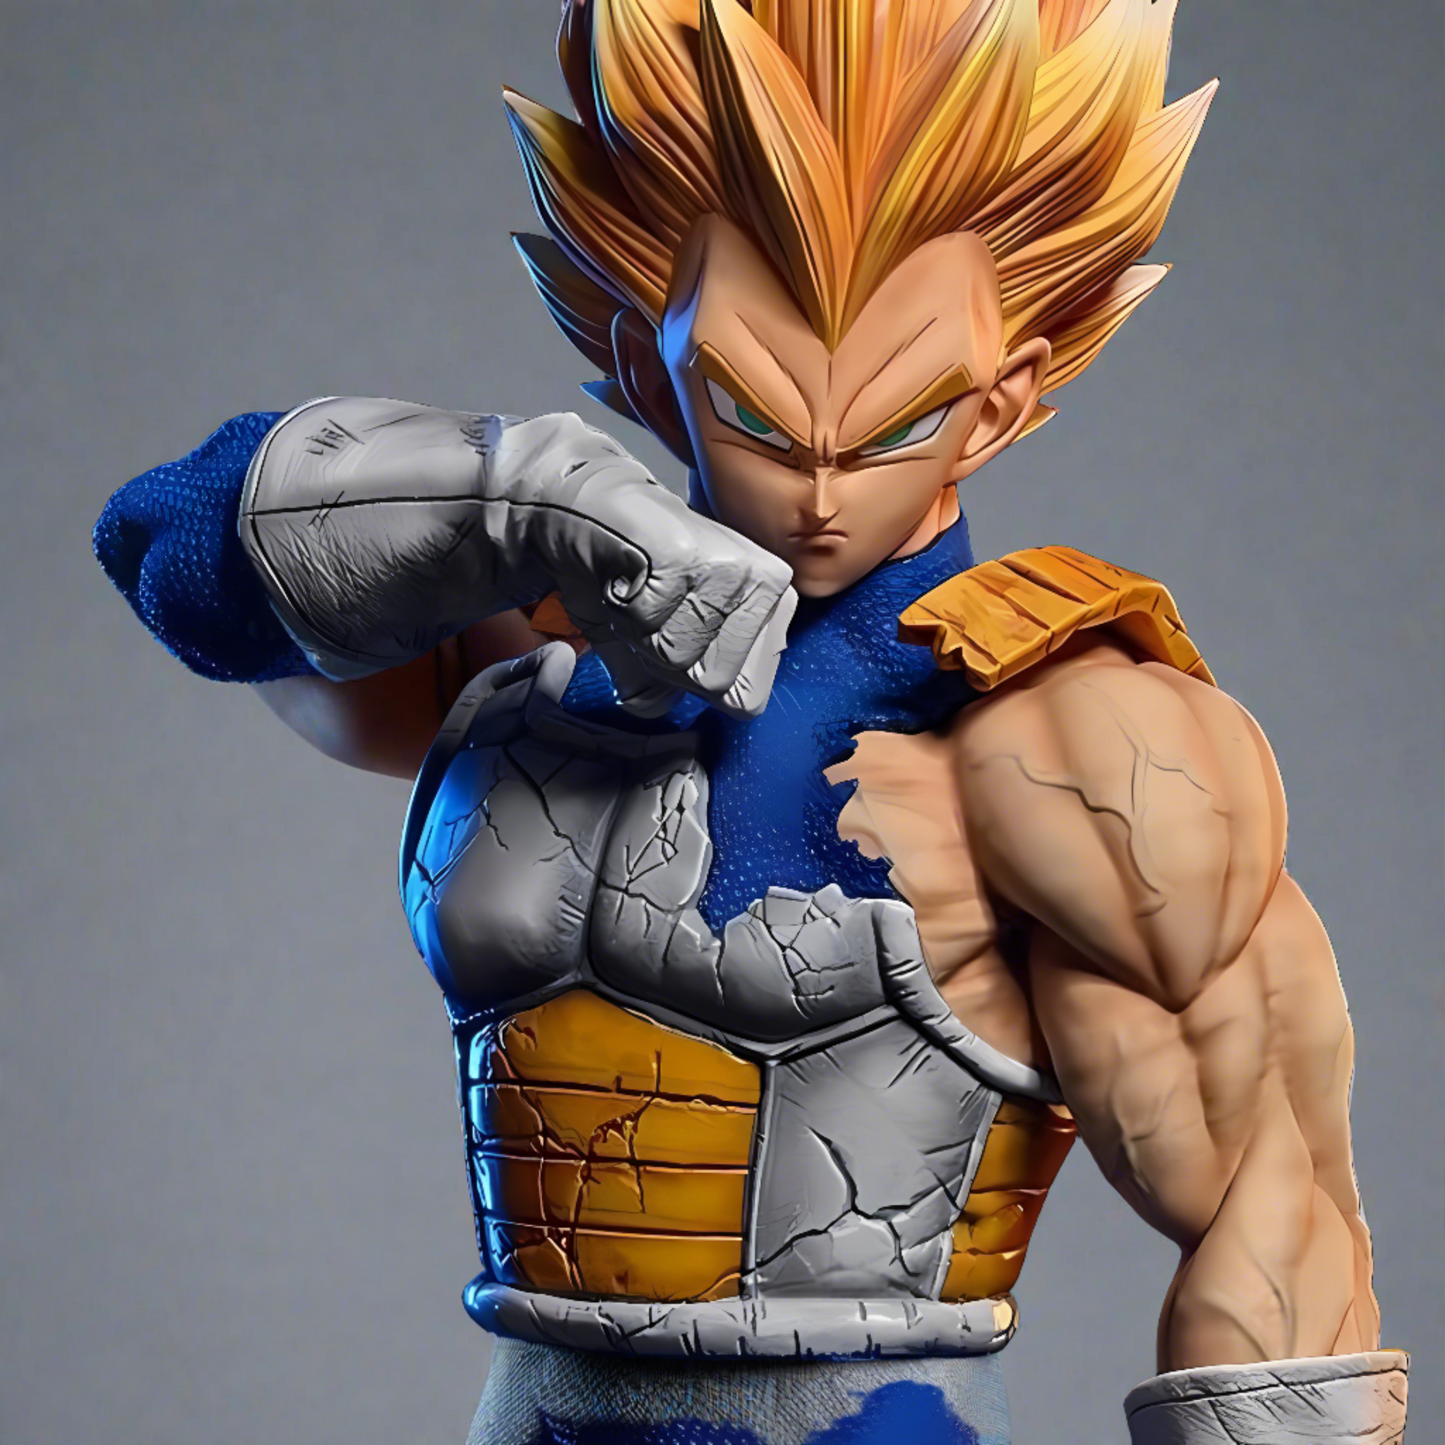 Close-up of Vegeta as a Super Saiyan, with intricate facial detailing and battle-worn armor, set against a dark smoky backdrop.